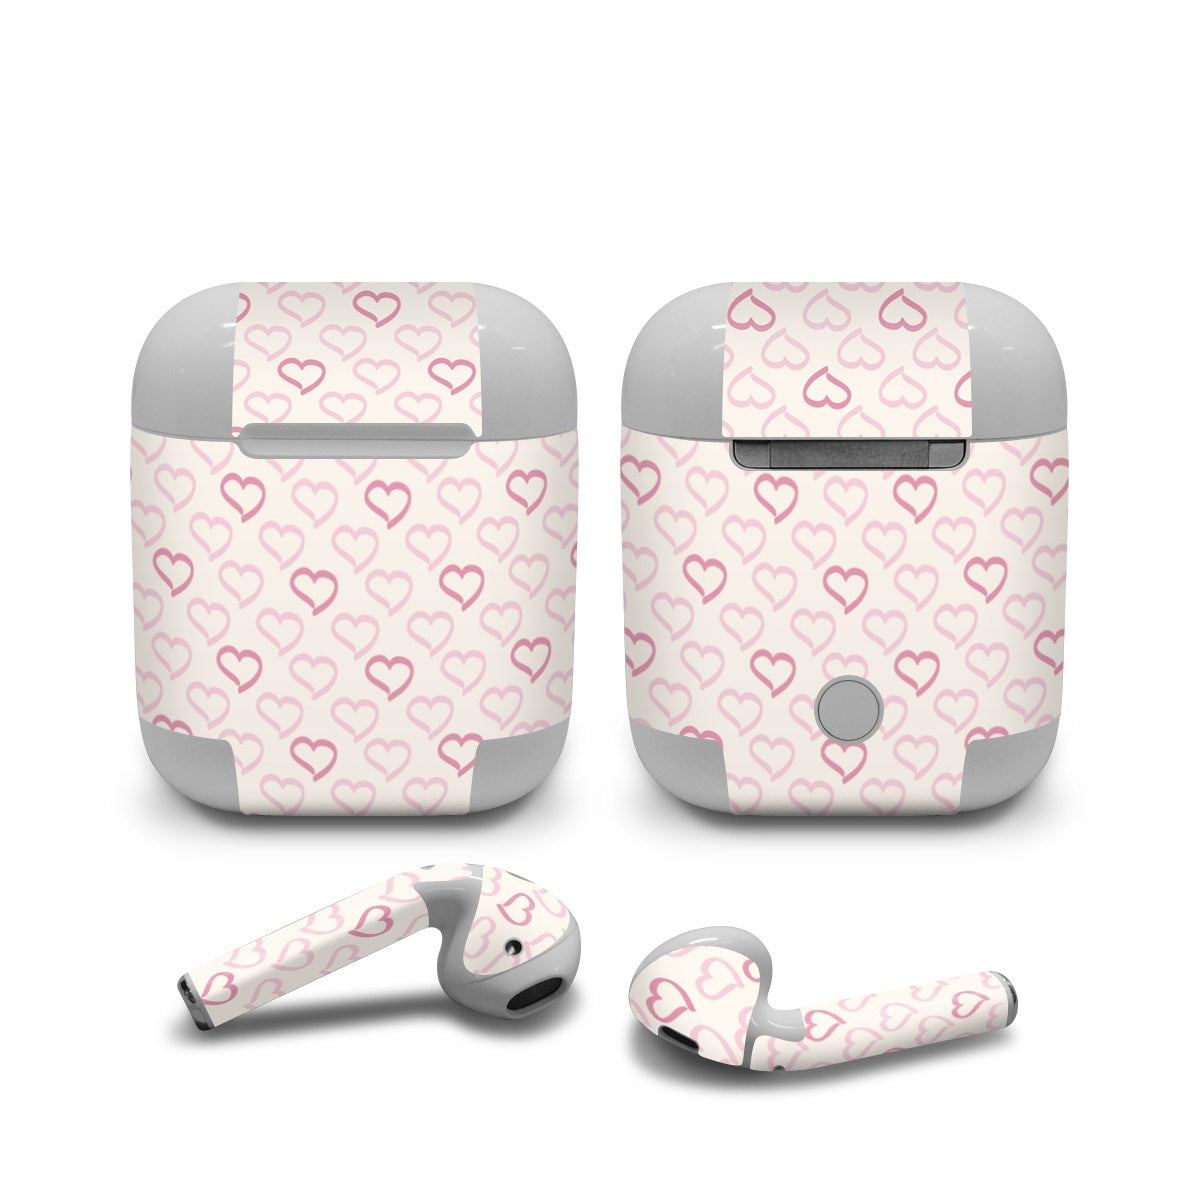 Patterned Hearts - Apple AirPods Skin